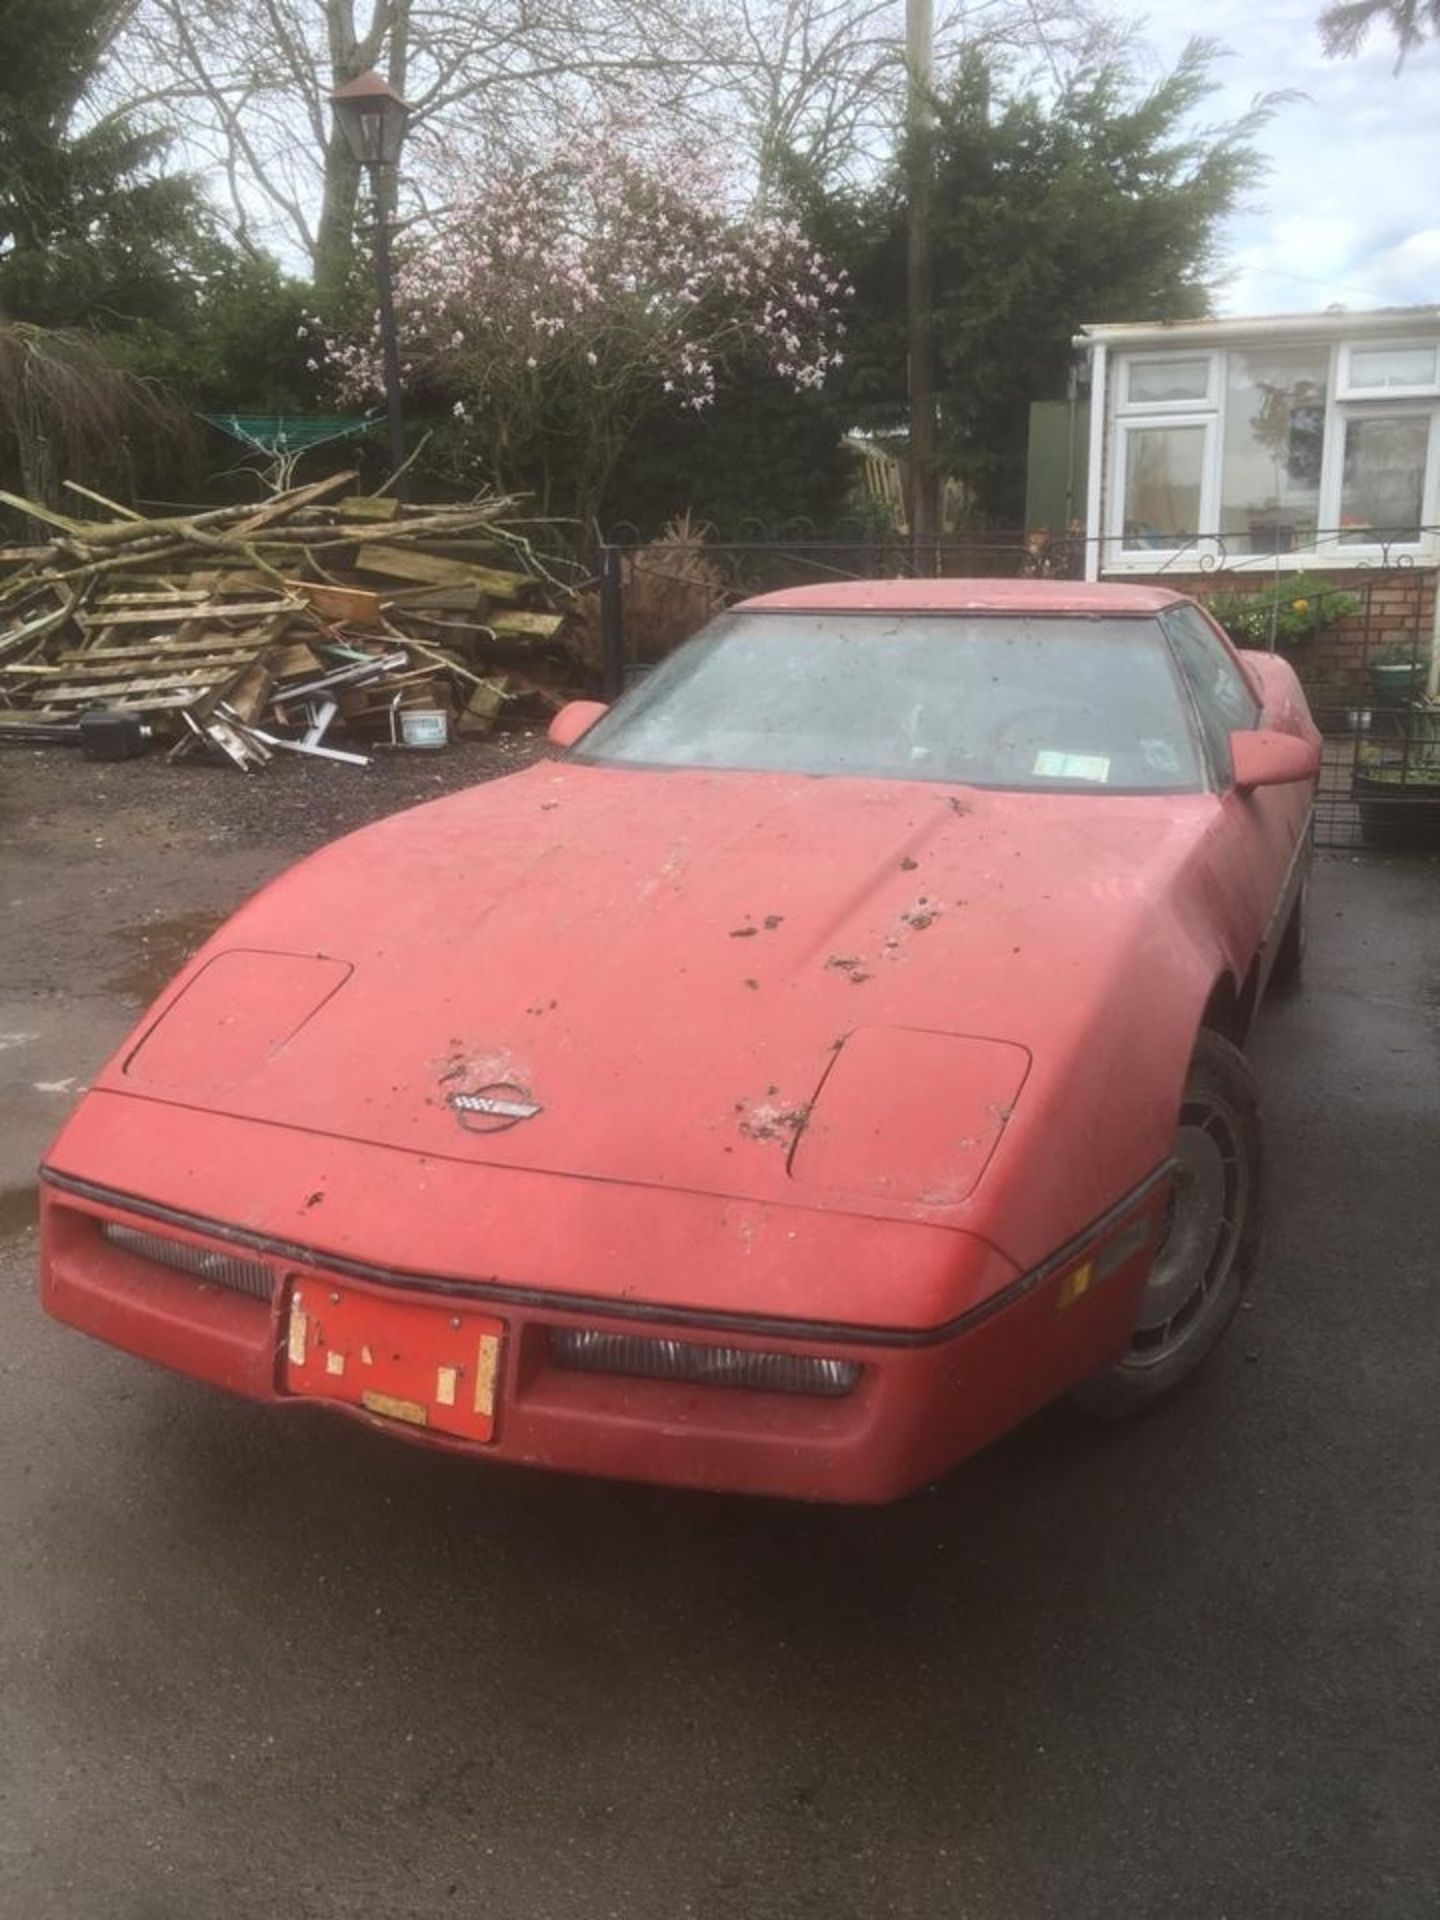 A 1983 Chevrolet Corvette C4 Registration number A541 OEL Chassis number IGIAY0784E5128138 Red and